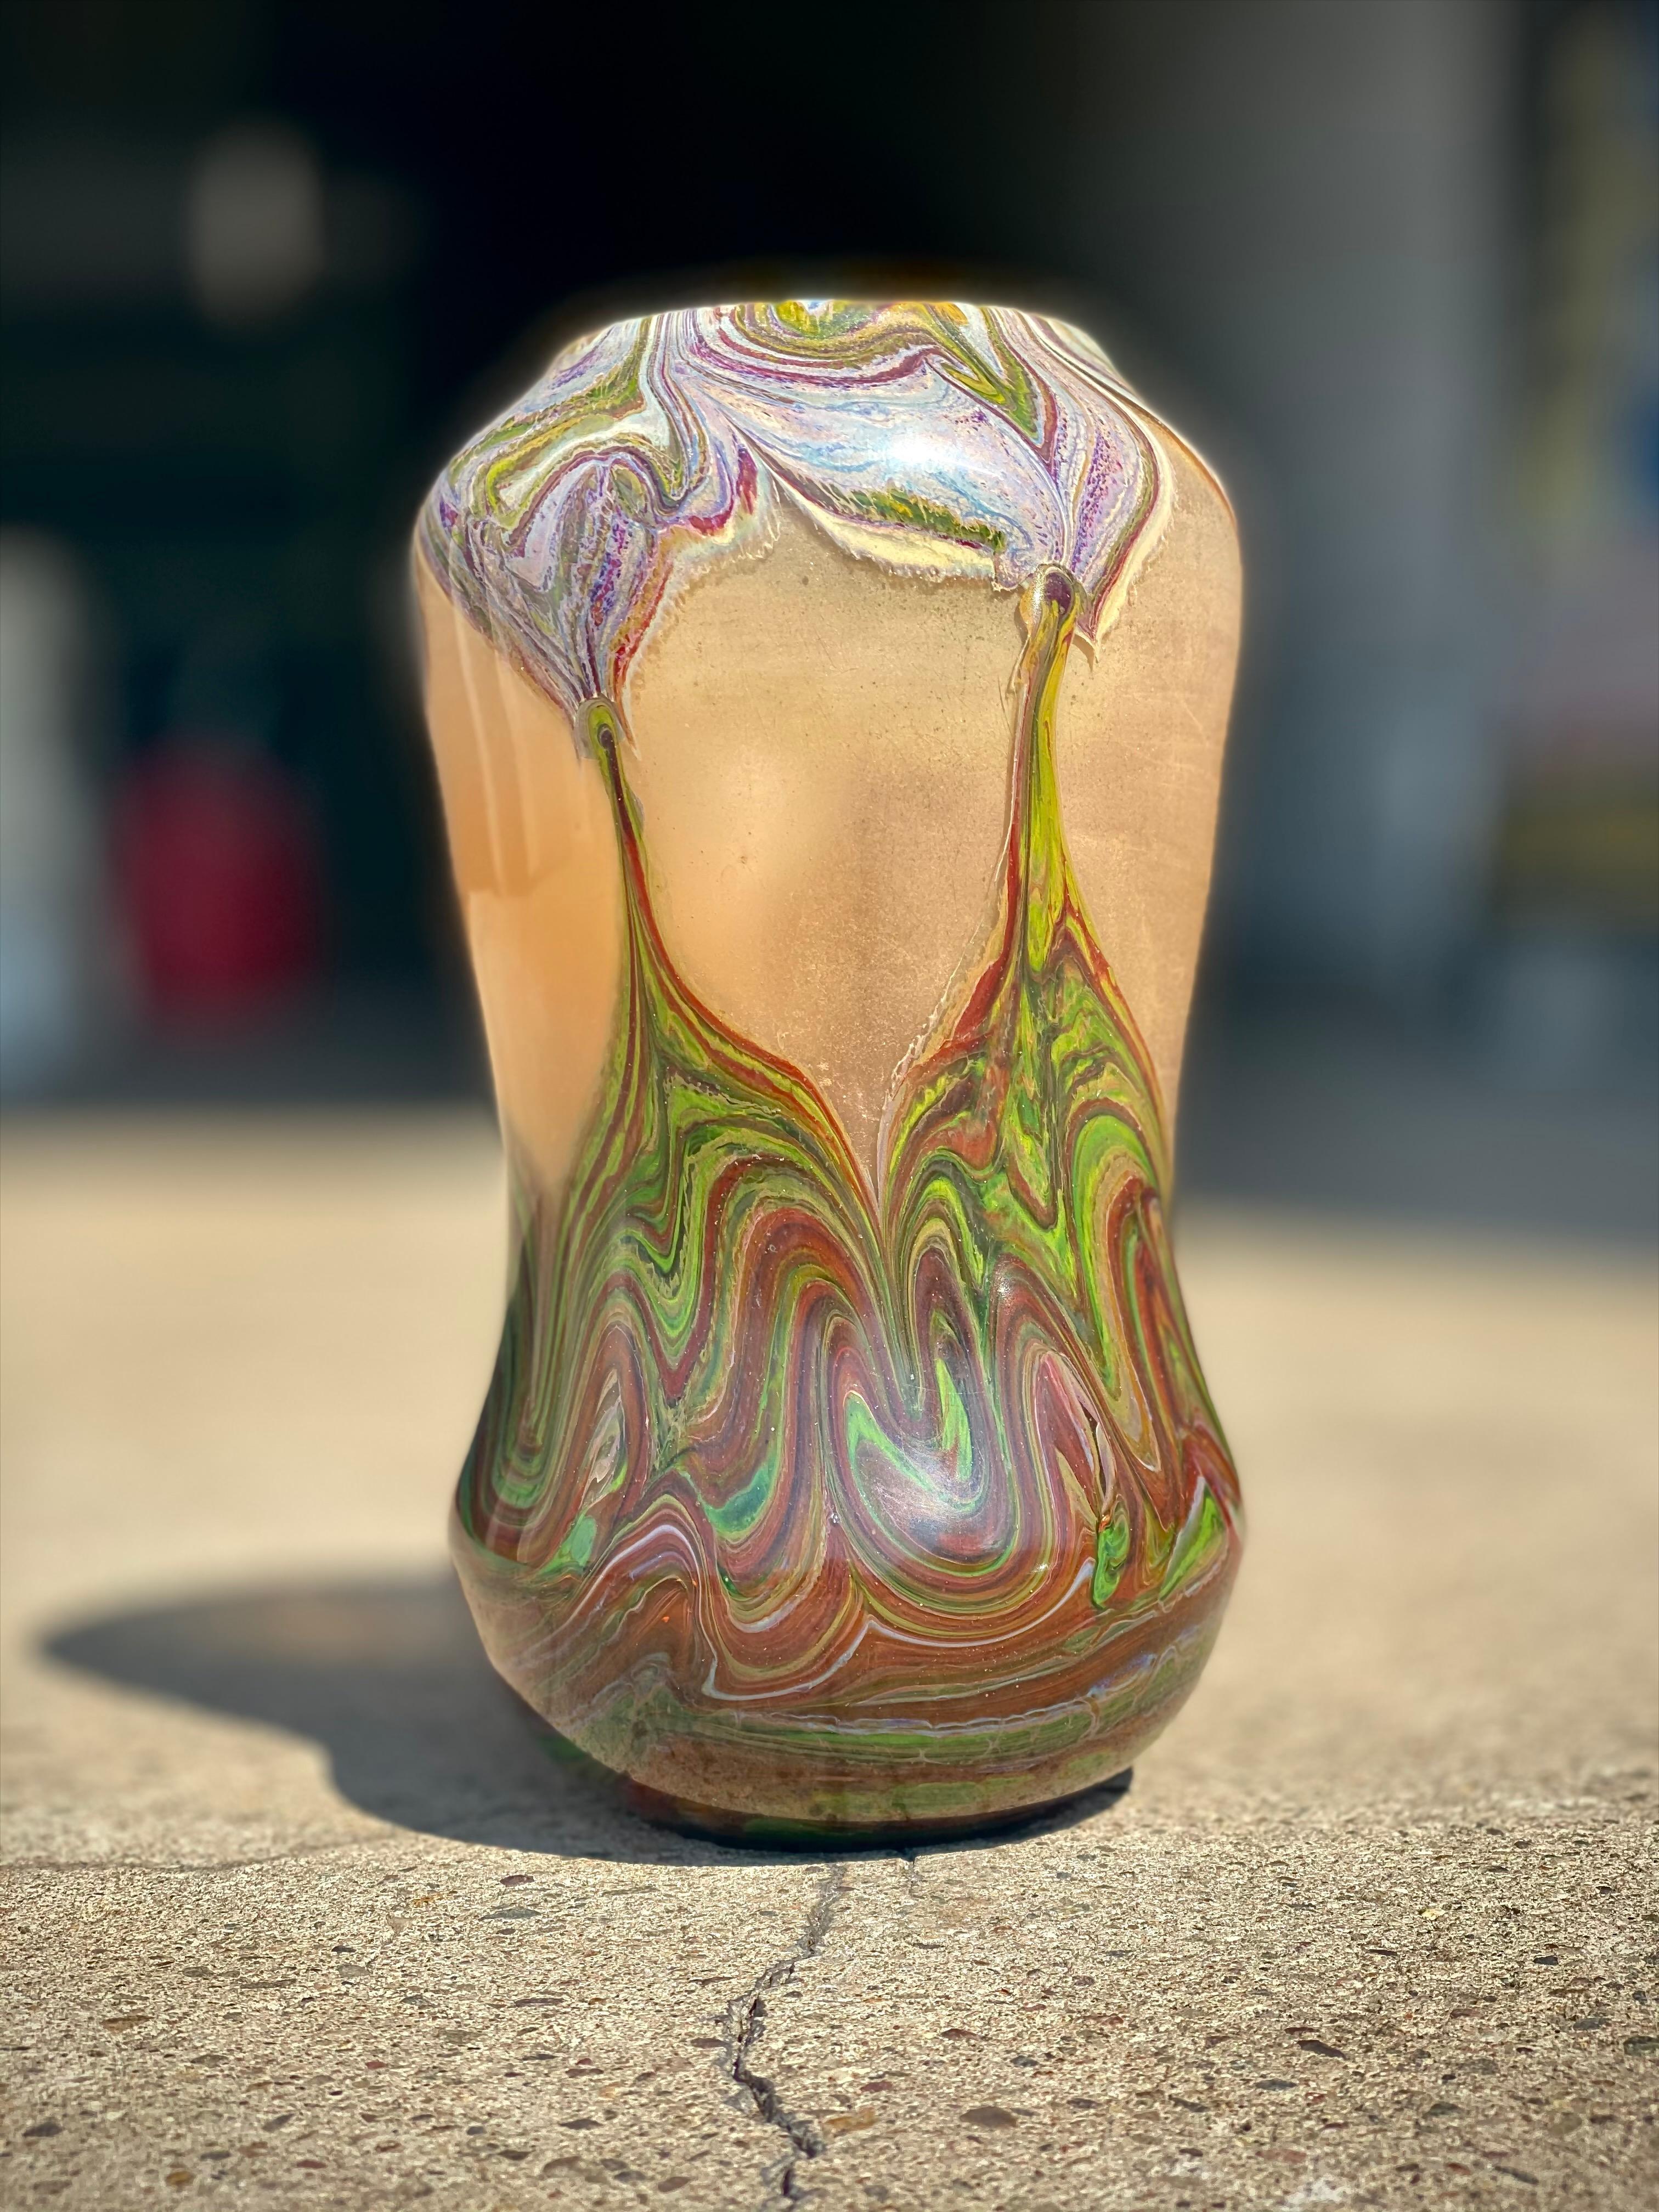 An exceptionally rare American Art Nouveau Tiffany Favrile Reactive paperweight vase decorated with an intense red, mauve, and green heavy swirl decoration throughout furhter leading into an exposed window technique. The interior of the vase is both